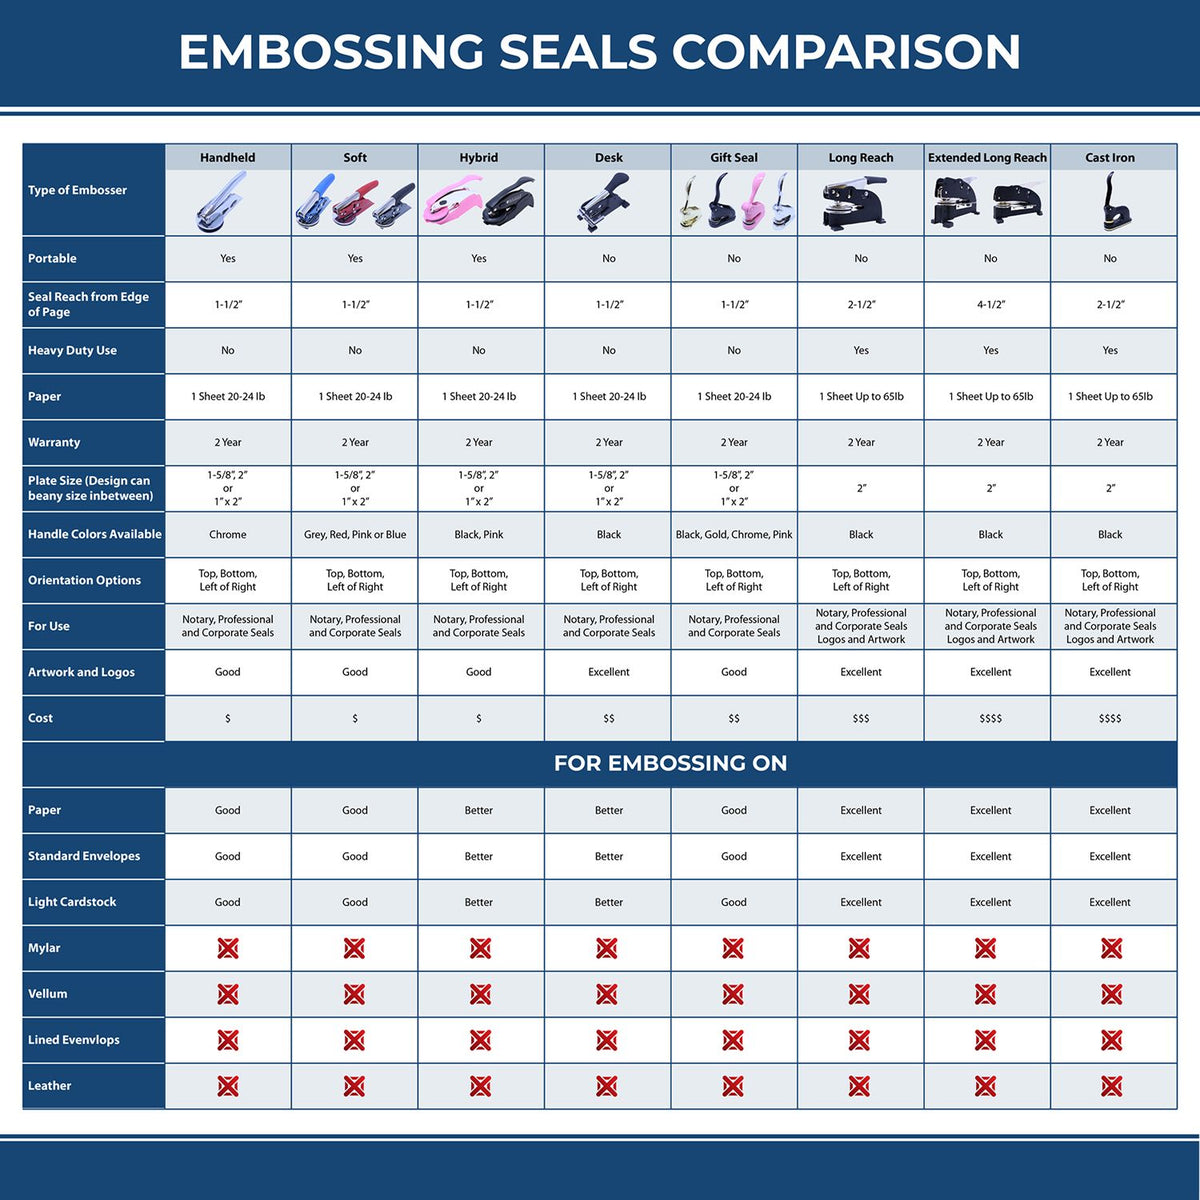 A comparison chart for the different types of mount models available for the Extended Long Reach Idaho Architect Seal Embosser.